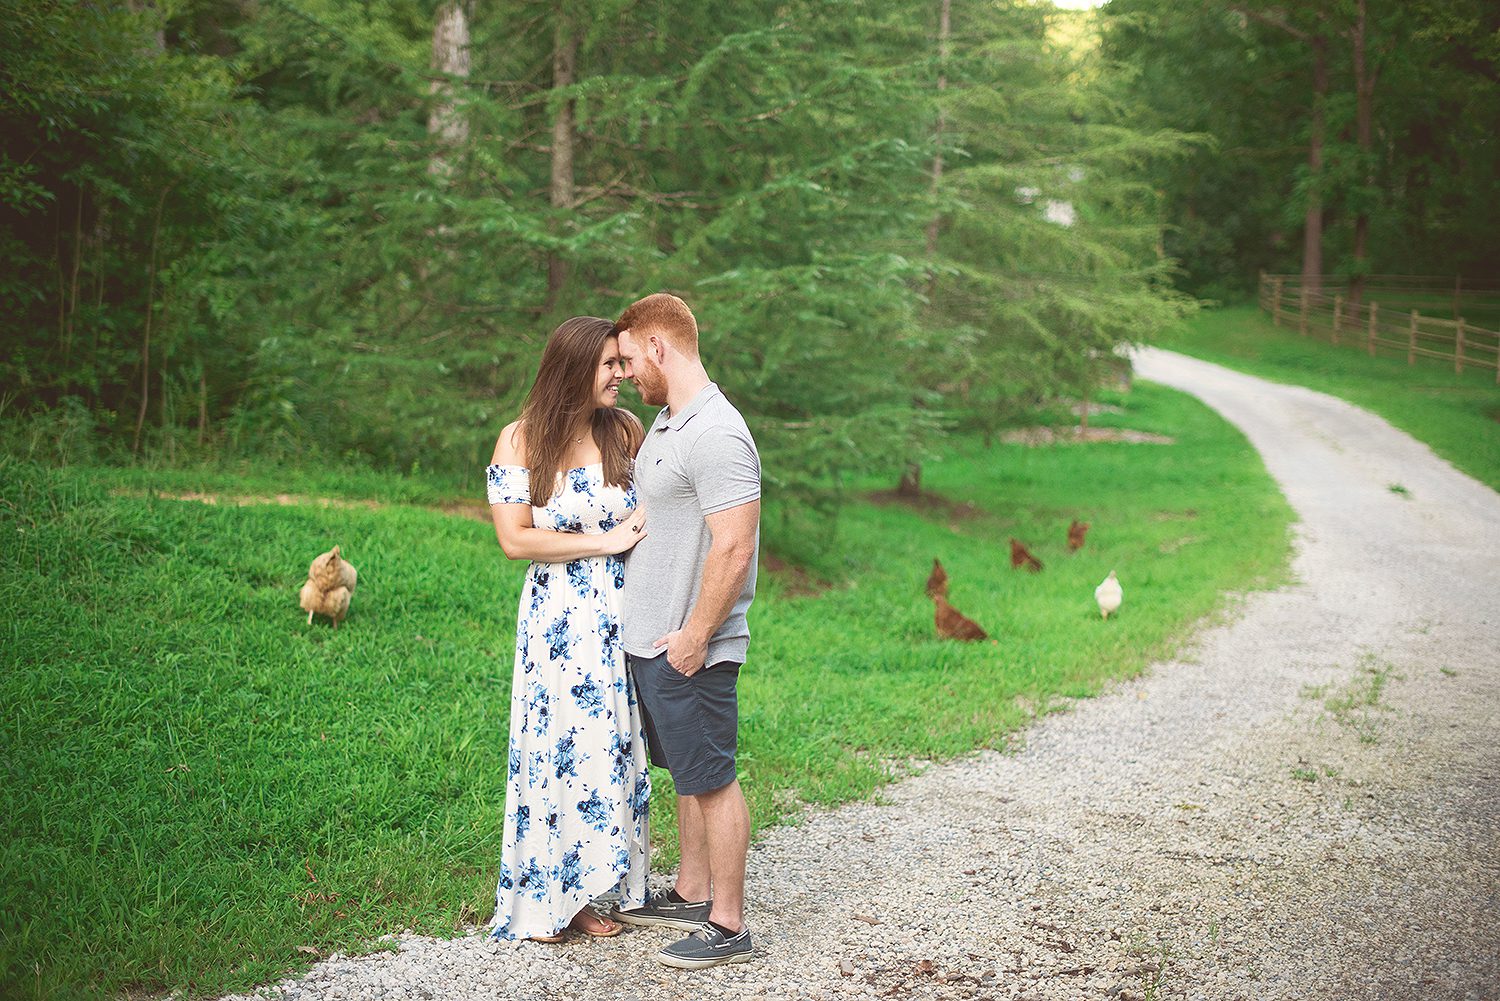 professional -engagement -photography -the -1932 -barn -wedding -photography